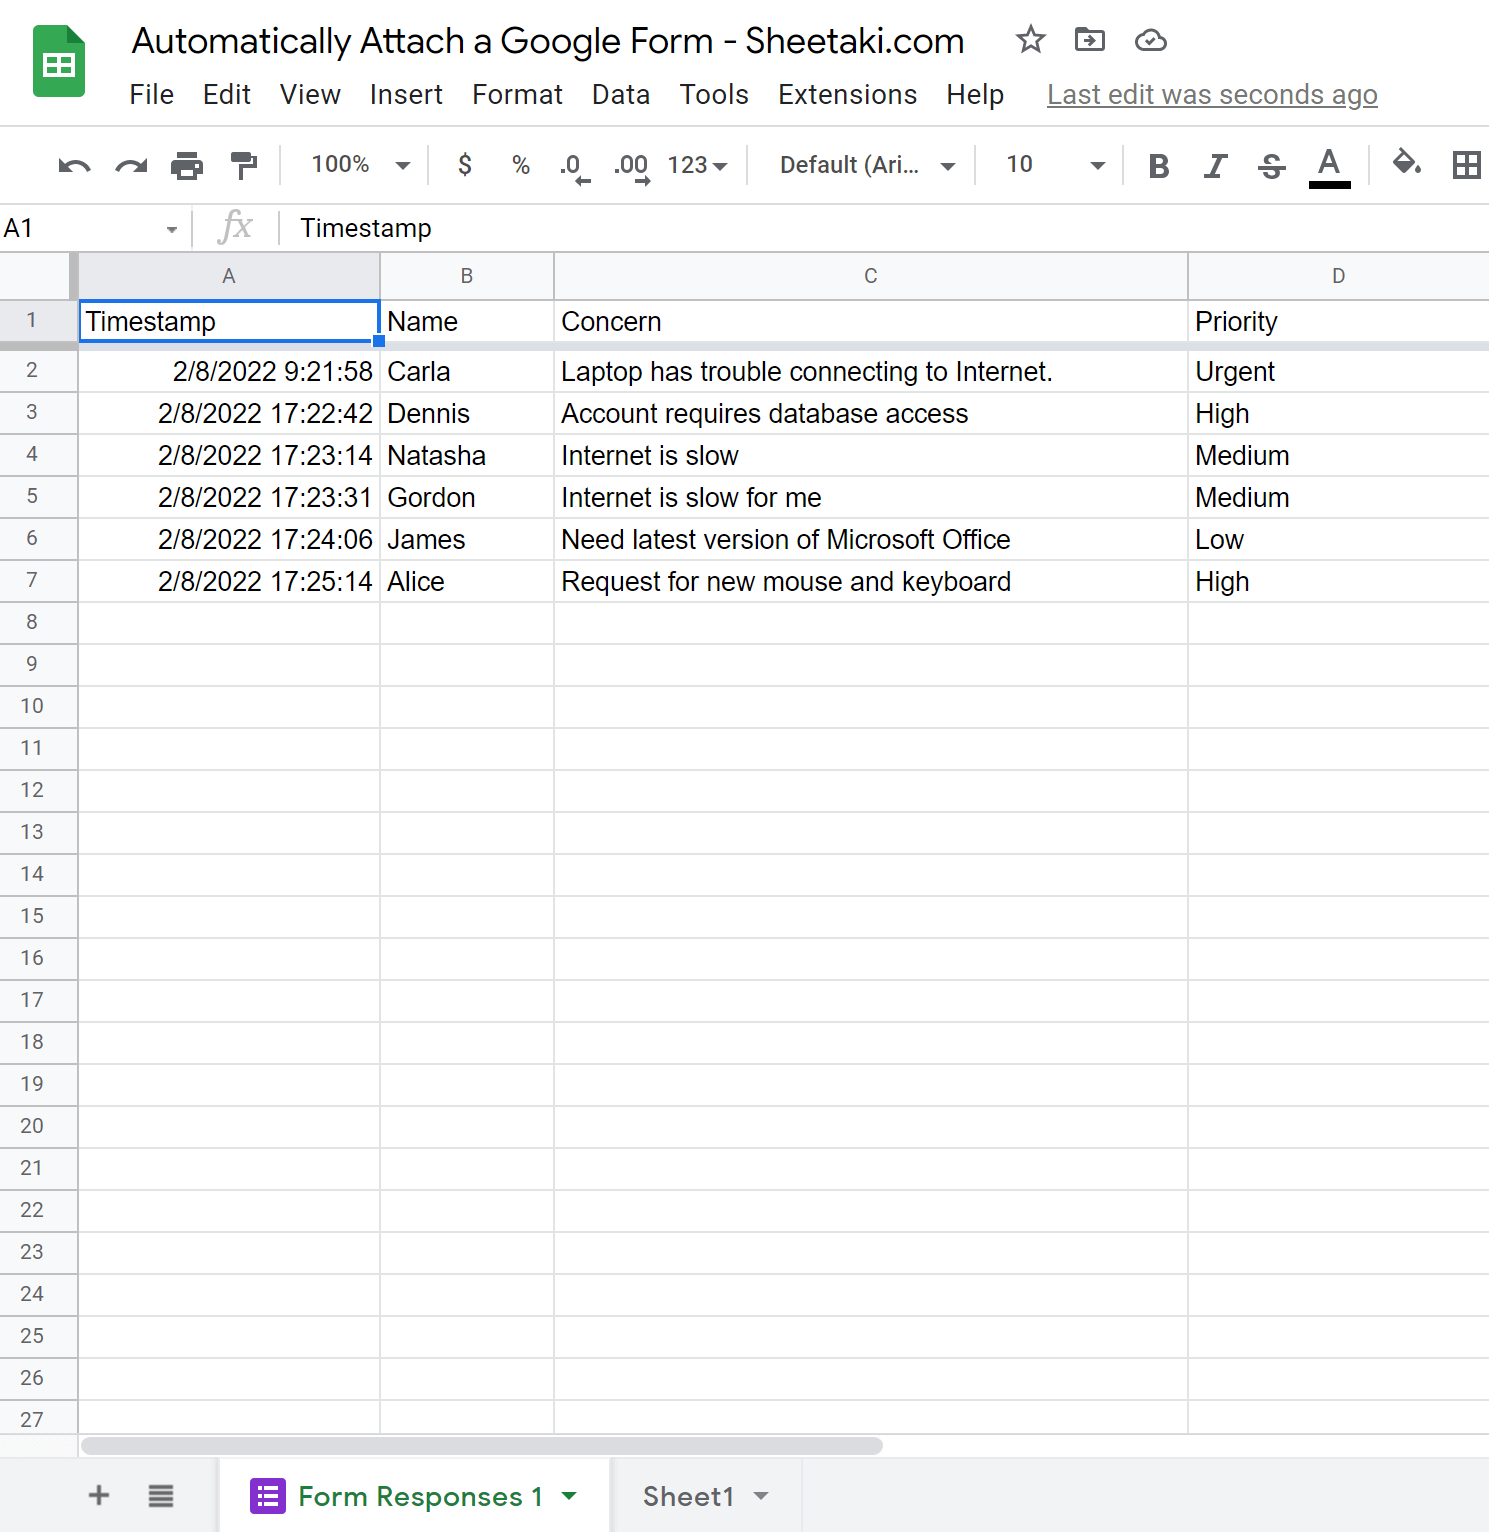 example of Automatically Attaching Google Forms in Google Sheets